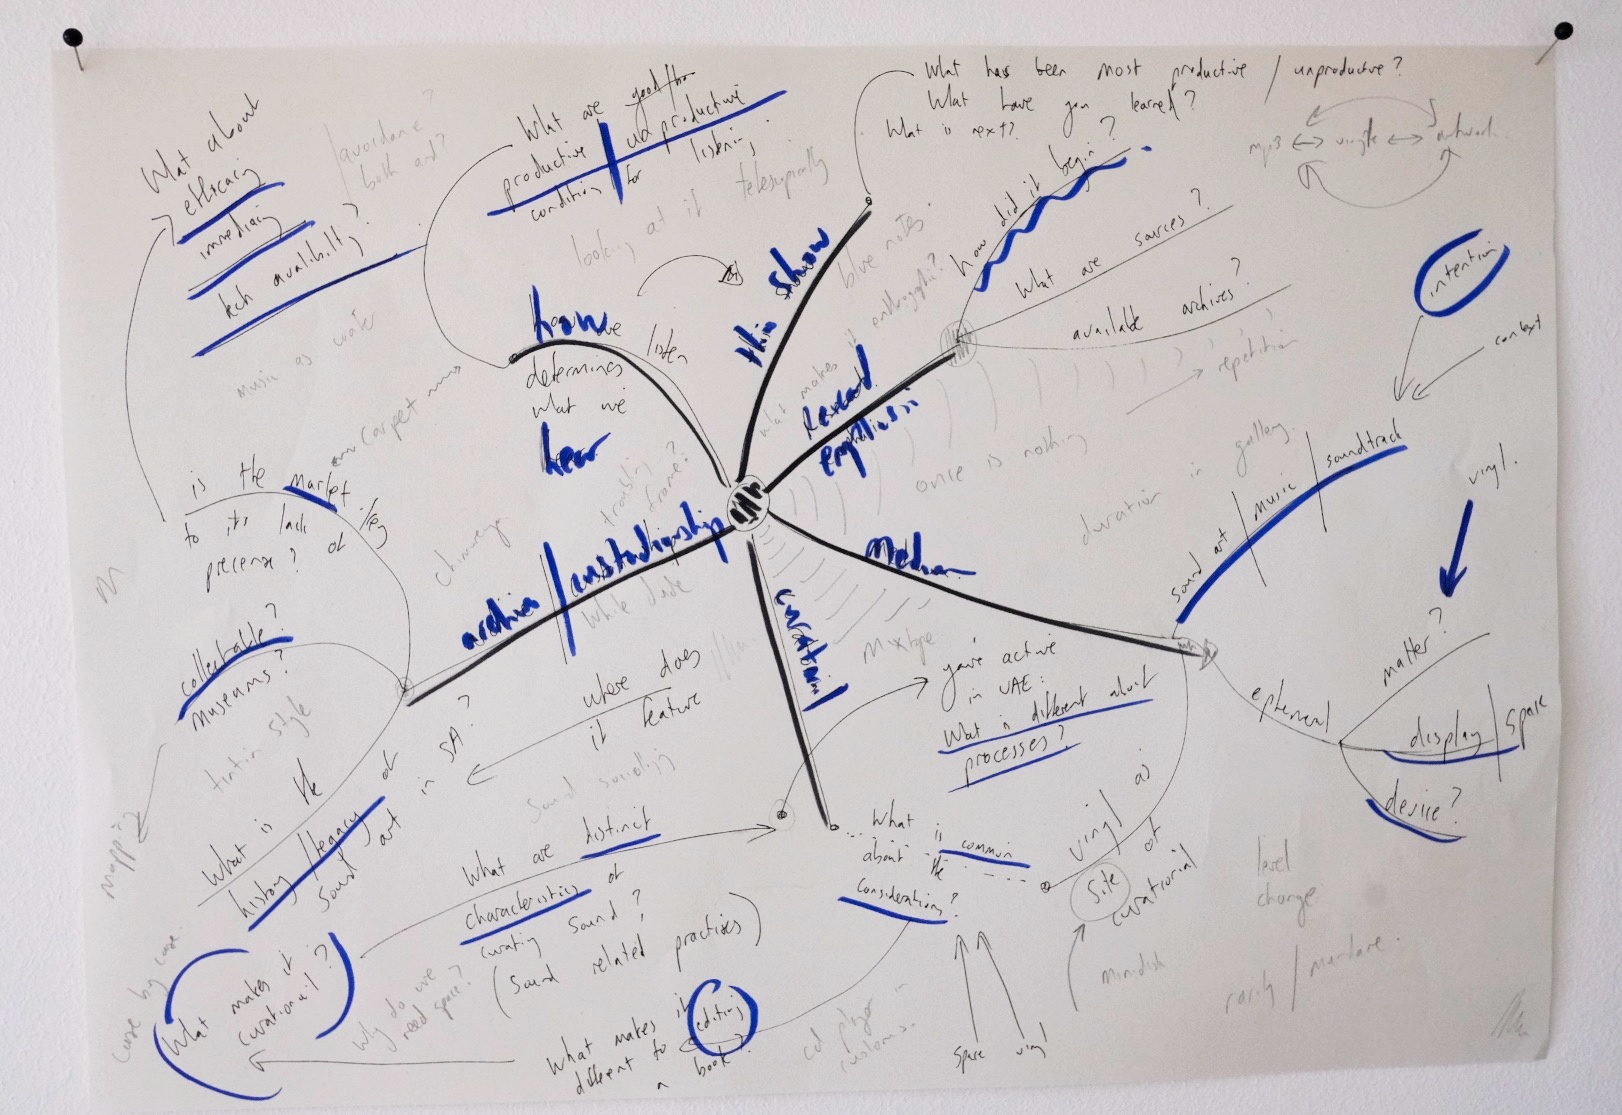 Photographic ephemera from ‘How we listen determines what we hear,’ a conversation between Bhavisha Panchia and Josh Ginsburg, in A4’s Gallery. A handwritten radial diagram on paper considers the complexities of curating sound.
